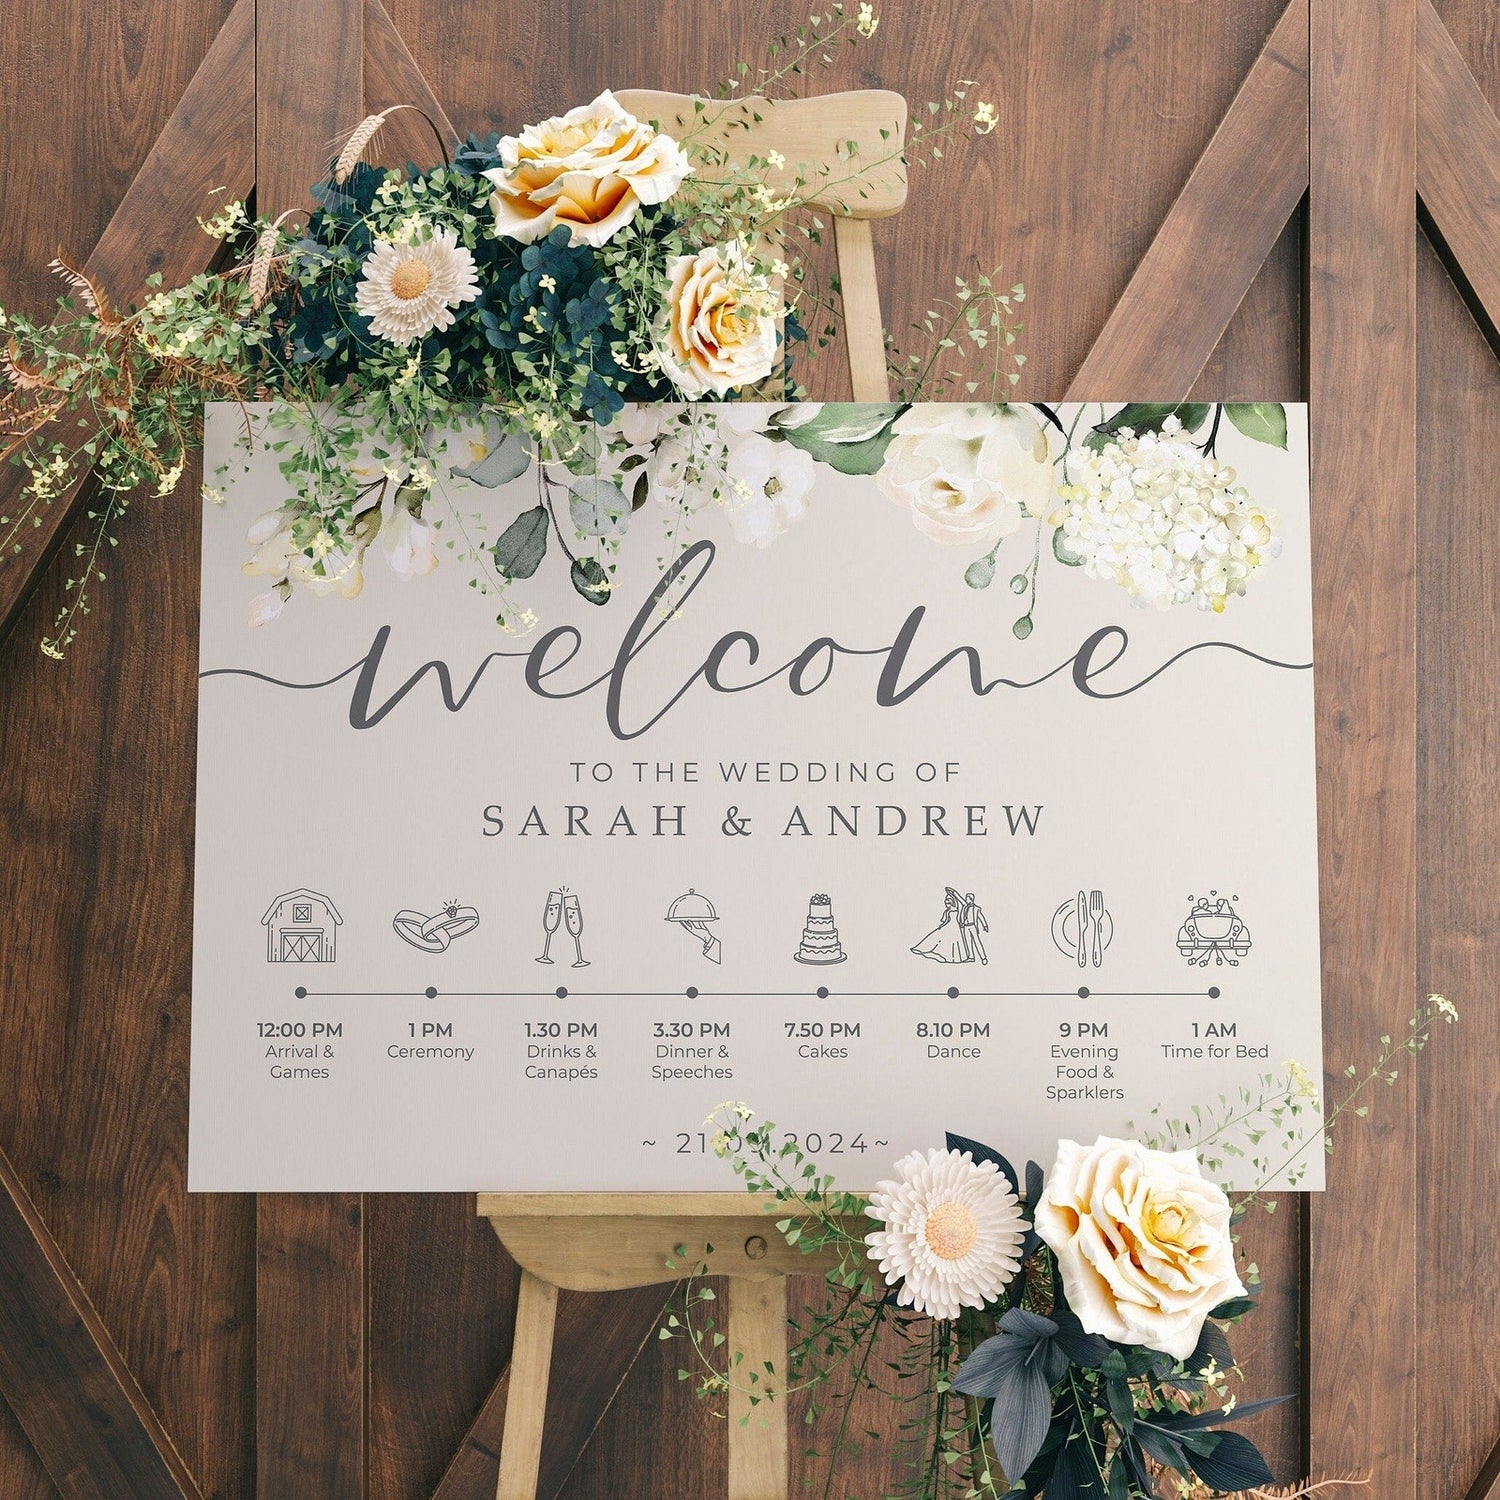 White Floral Order of the Day Wedding Welcome Sign